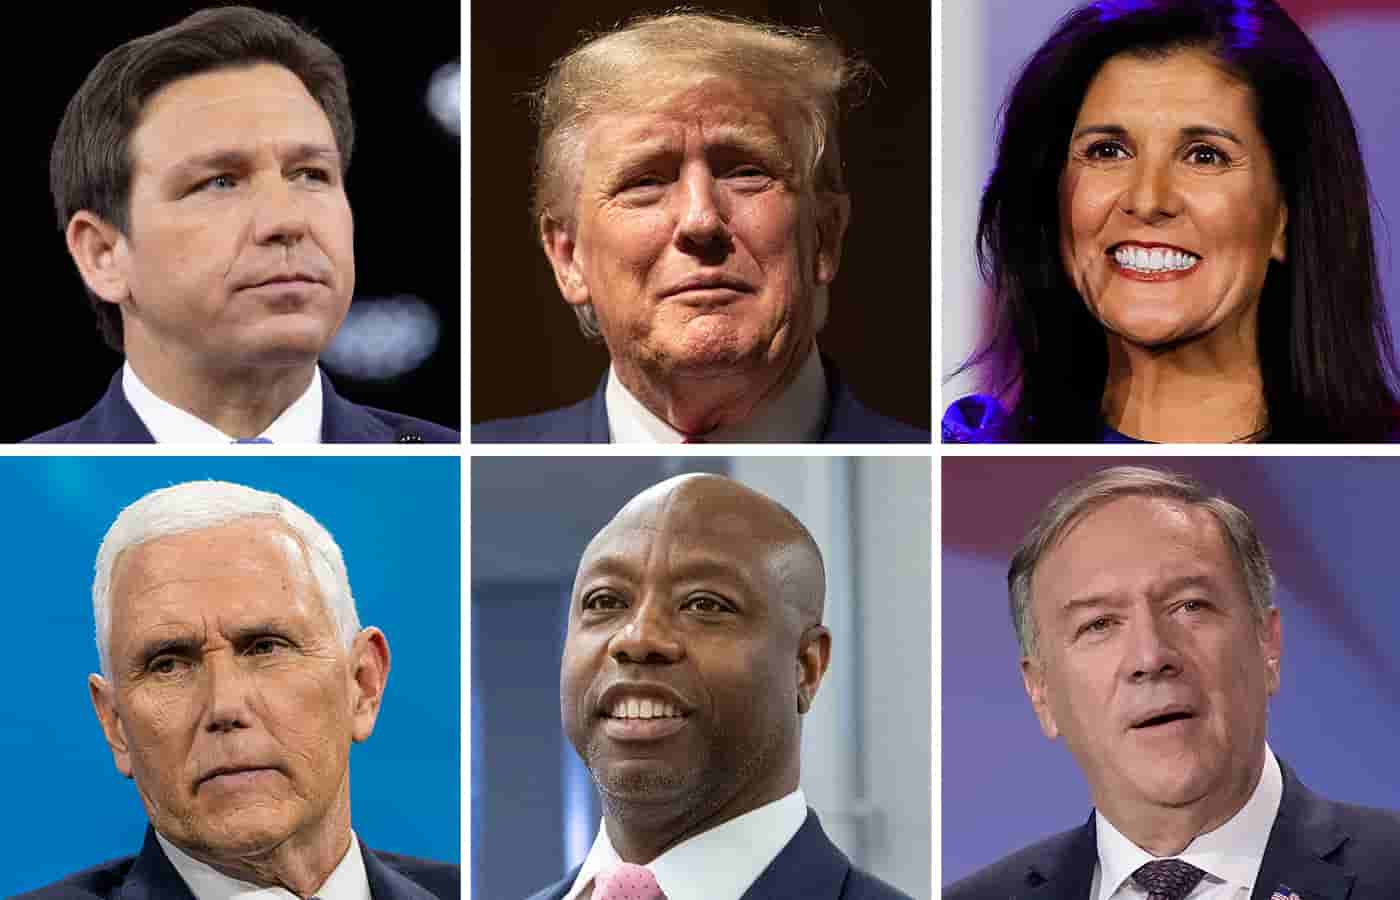 The field of potential 2024 Republican candidates, ranked